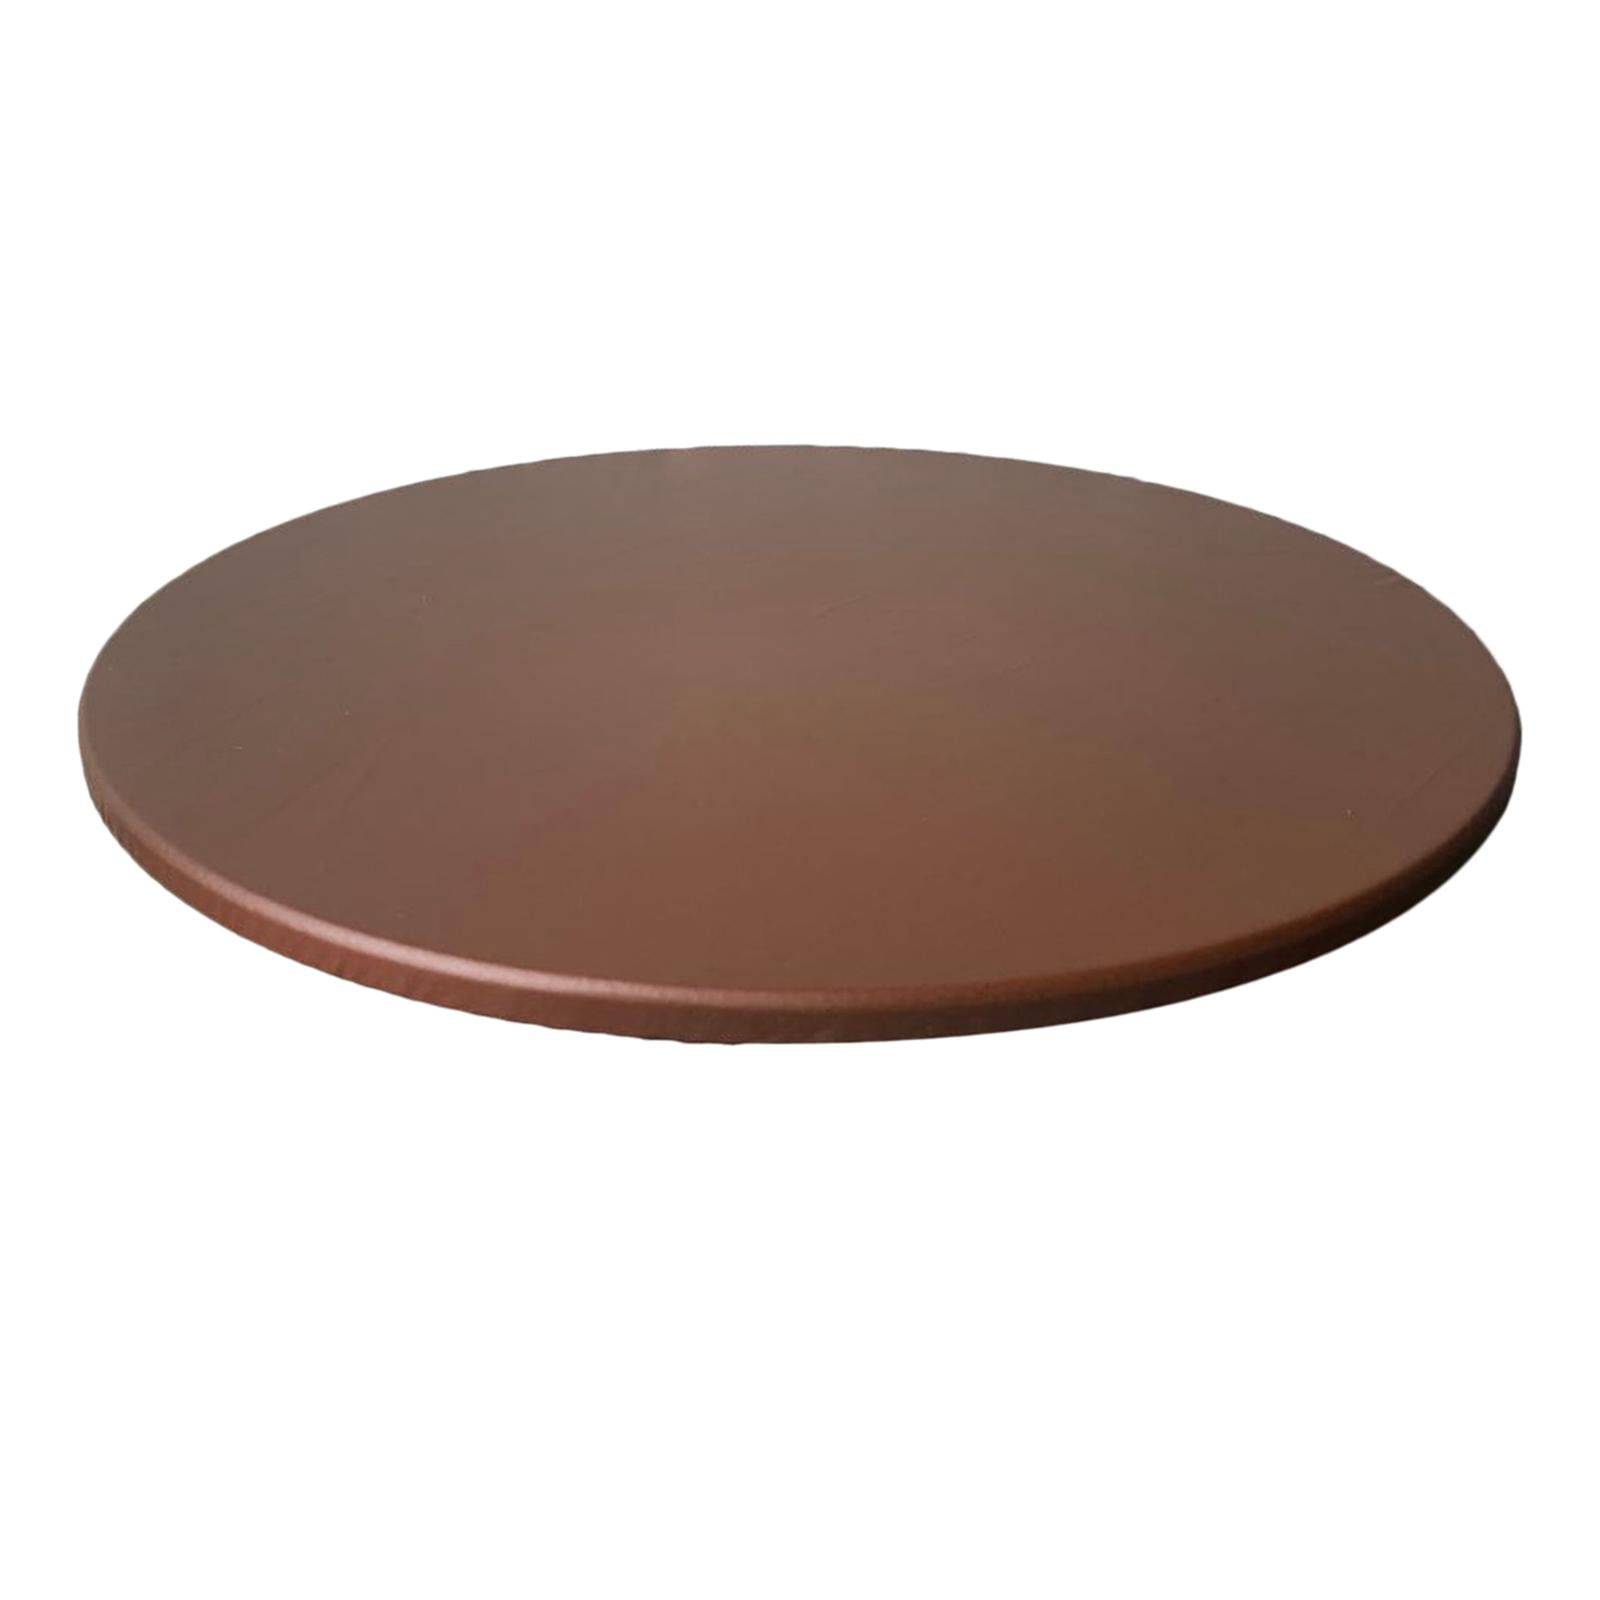 Polyester Elastic Fitted Round Tablecover Table Cloth for Home Catering Cafe 